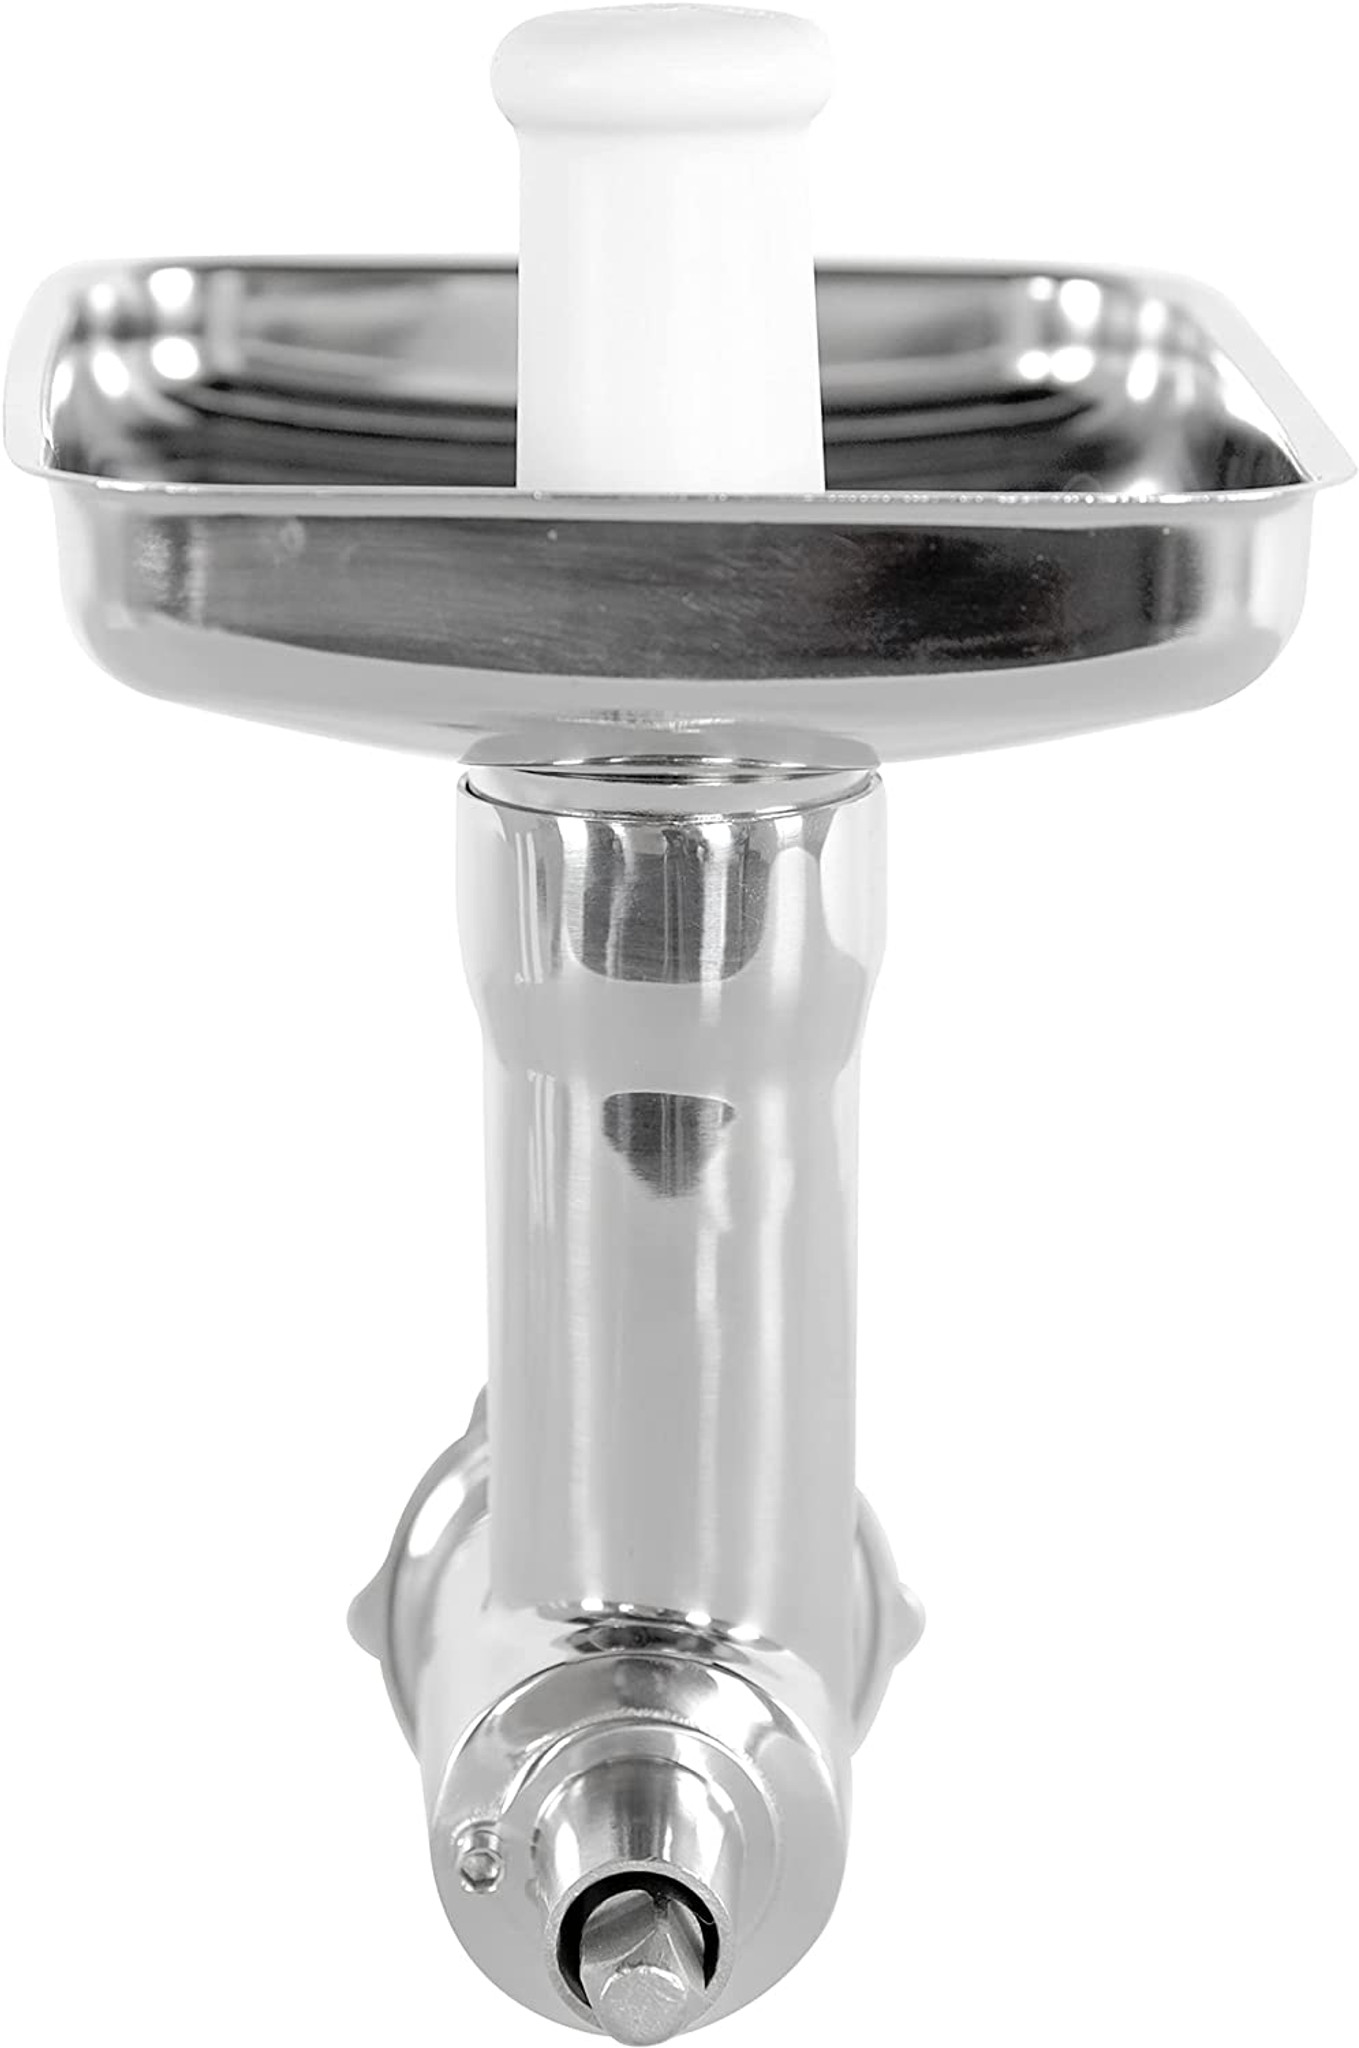 Stainless Steel Meat Grinder Attachment Kitchenaid - Food Grinder  Attachment Meat - Aliexpress